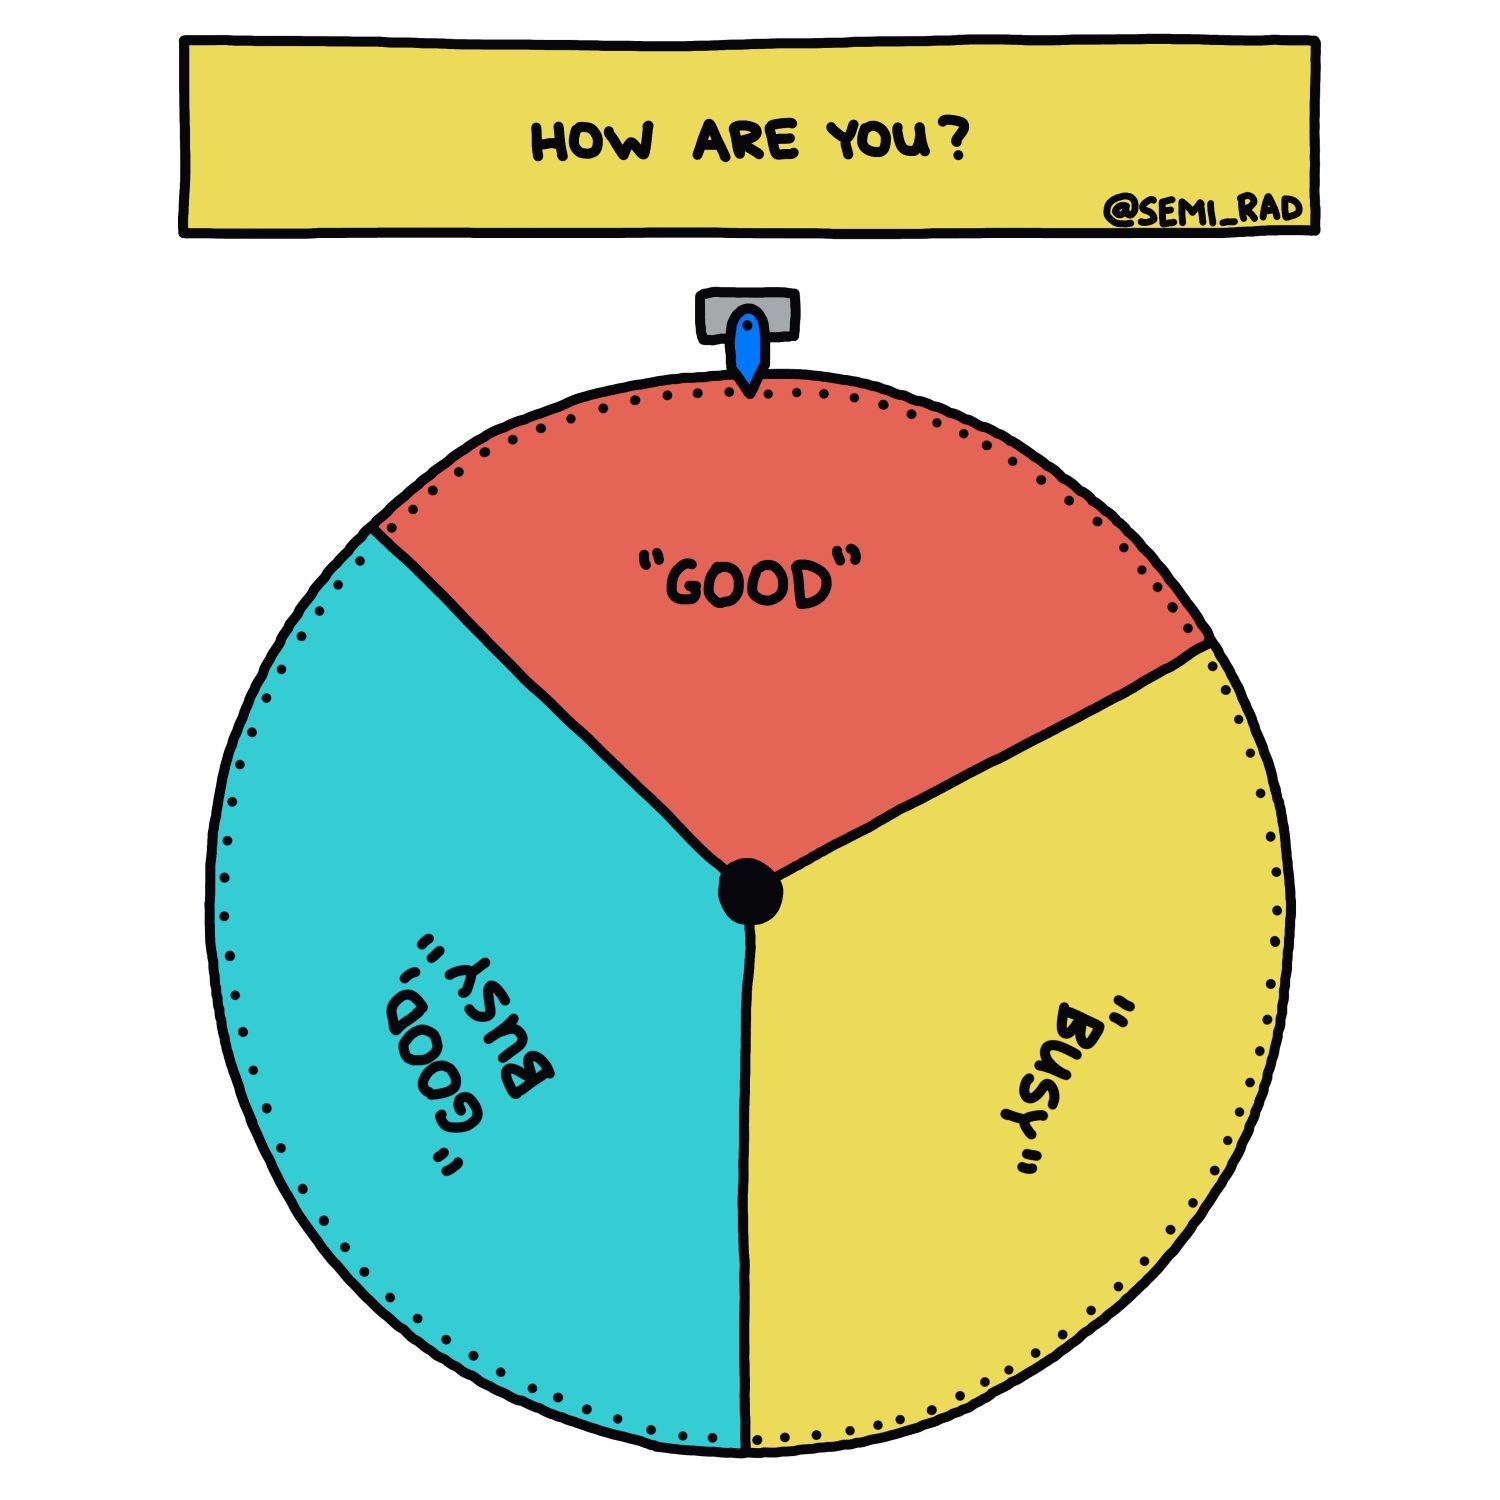 spinning wheel showing answers to the question "how are you?"